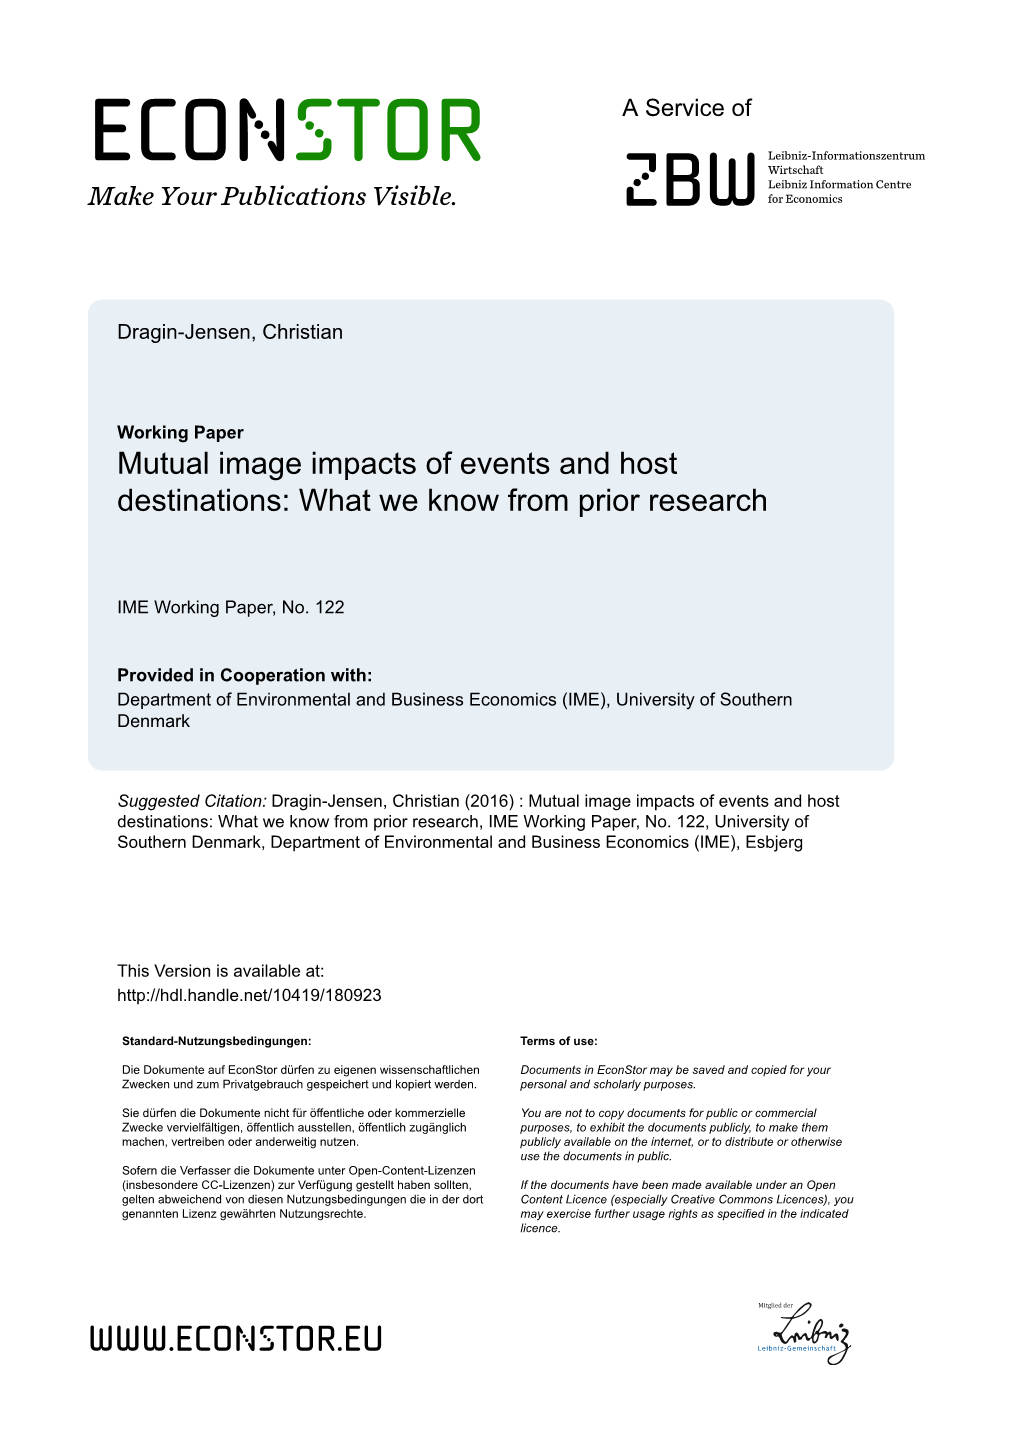 Mutual Image Impacts of Events and Host Destinations: What We Know from Prior Research